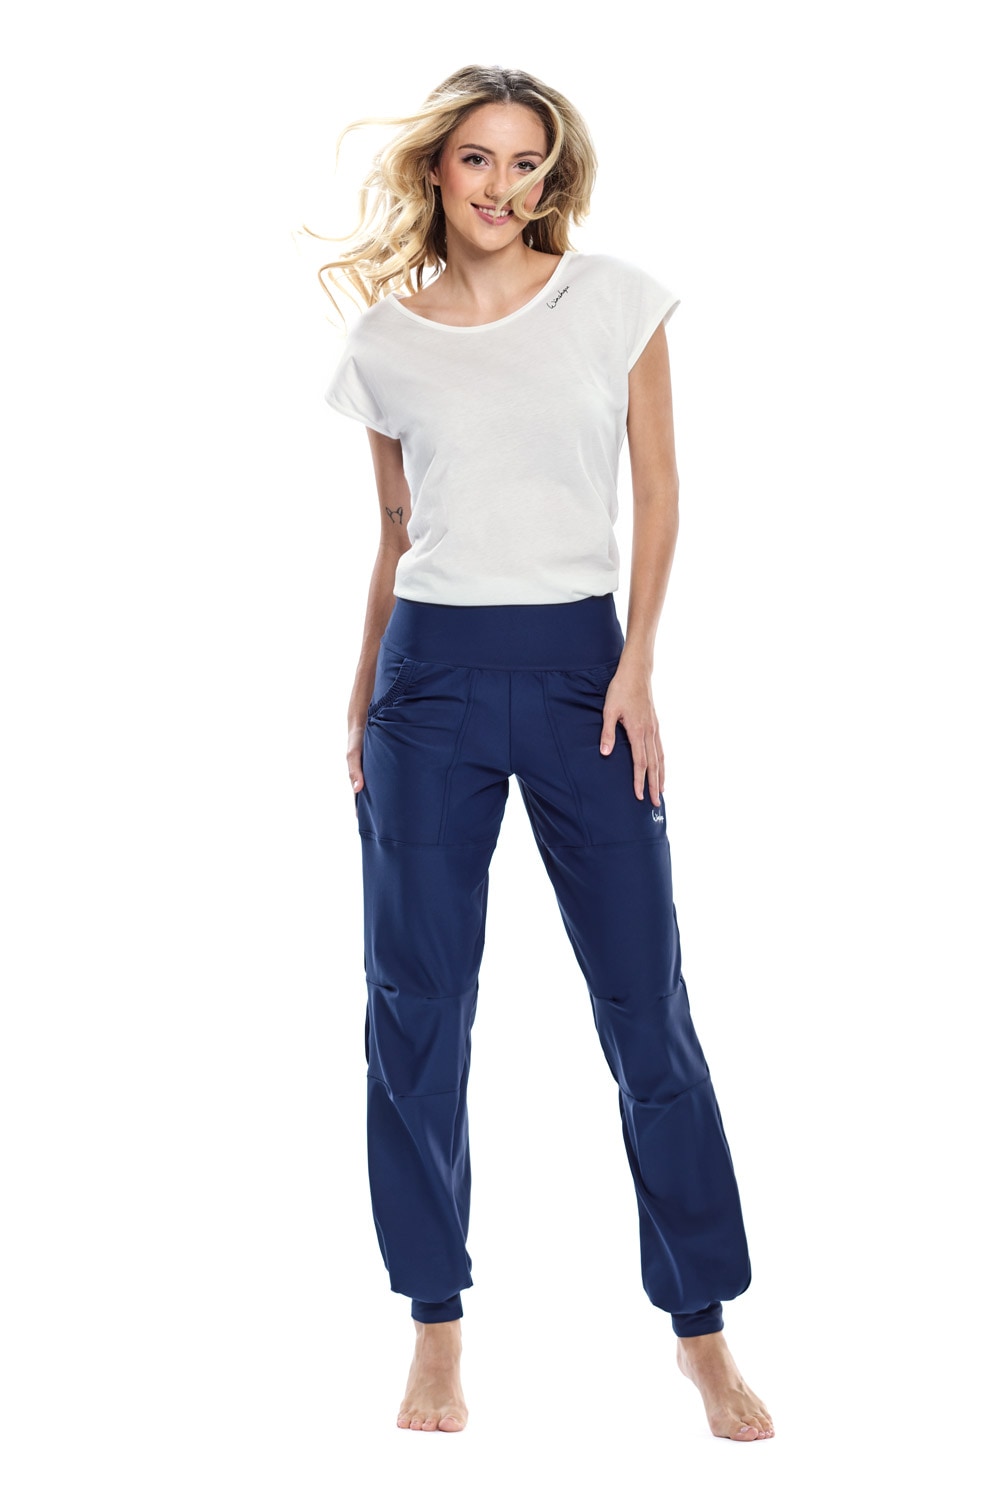 Winshape Sporthose »Functional Leisure Waist High Time LEI101C«, bei OTTO Comfort Trousers online